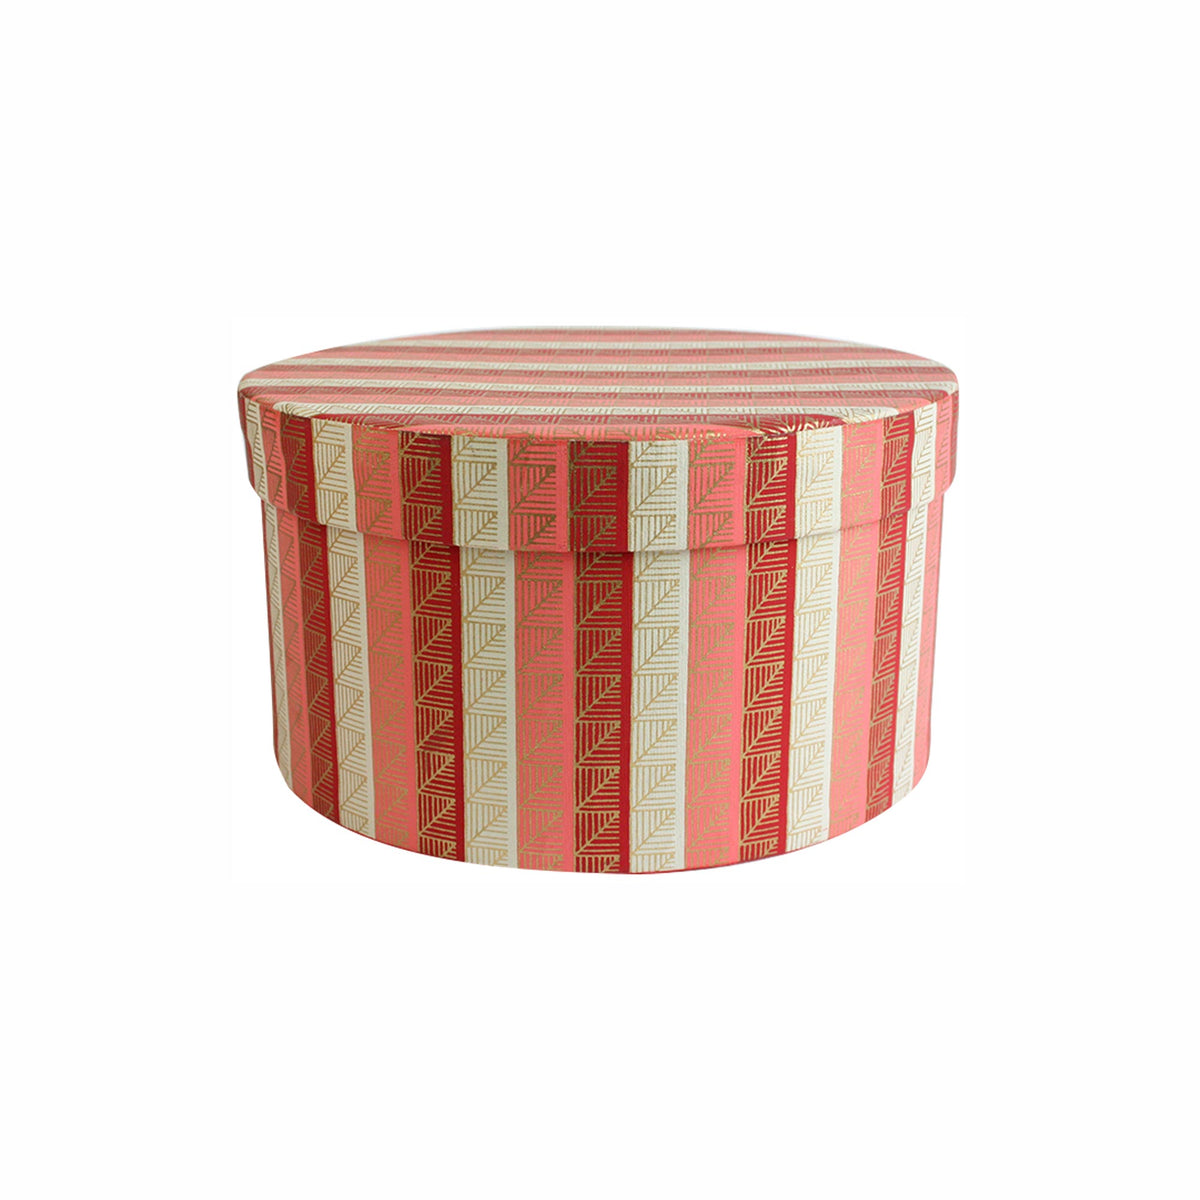 Handmade Chevron Patterned Red/Gold Gift Box - Single (Sizes Available)